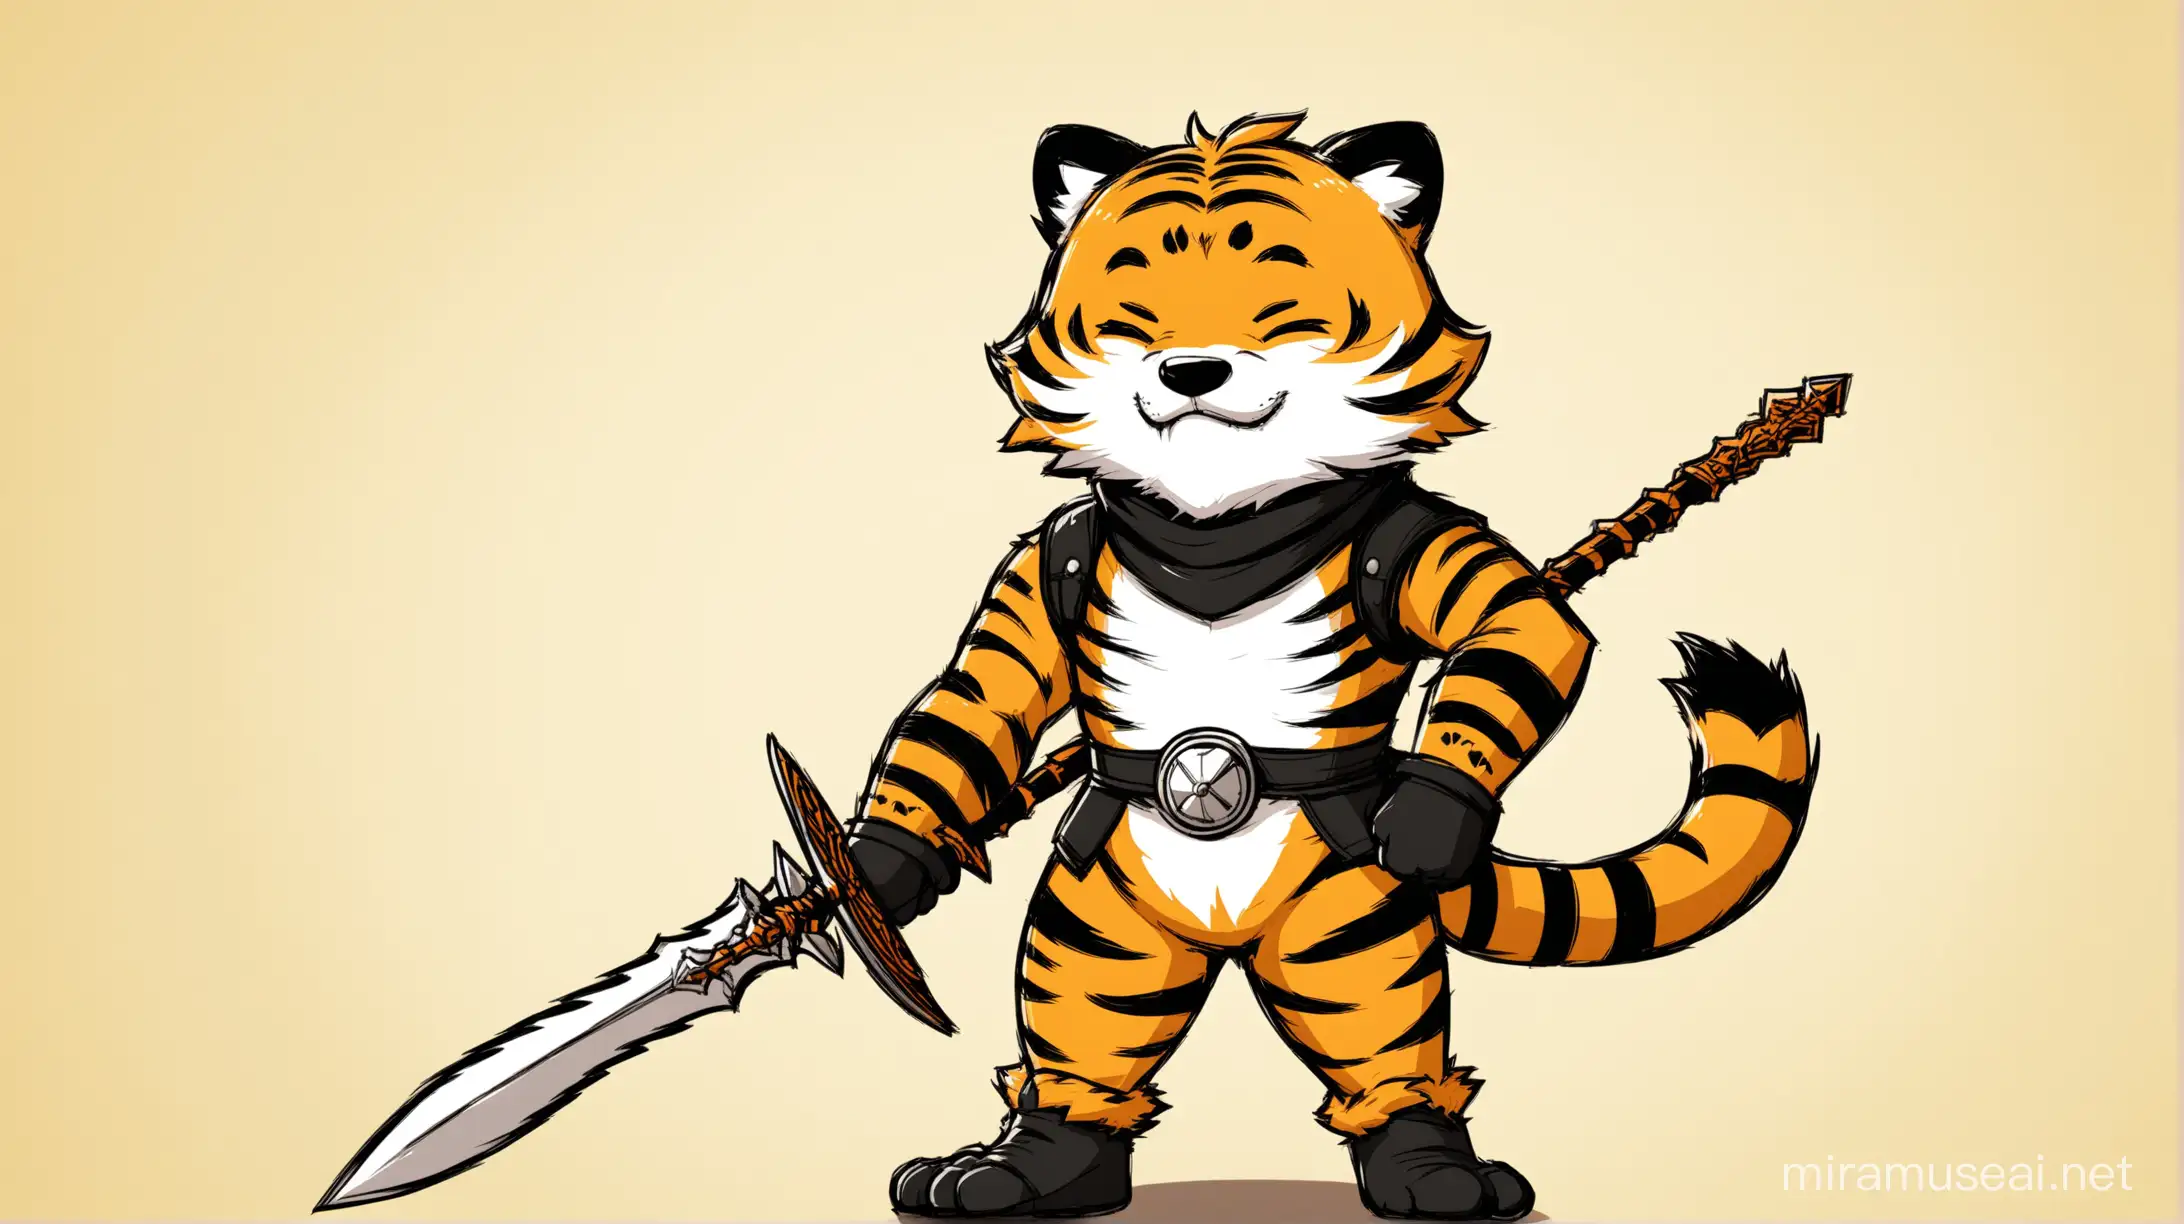 Hobbes, drawn in the style of RWBY